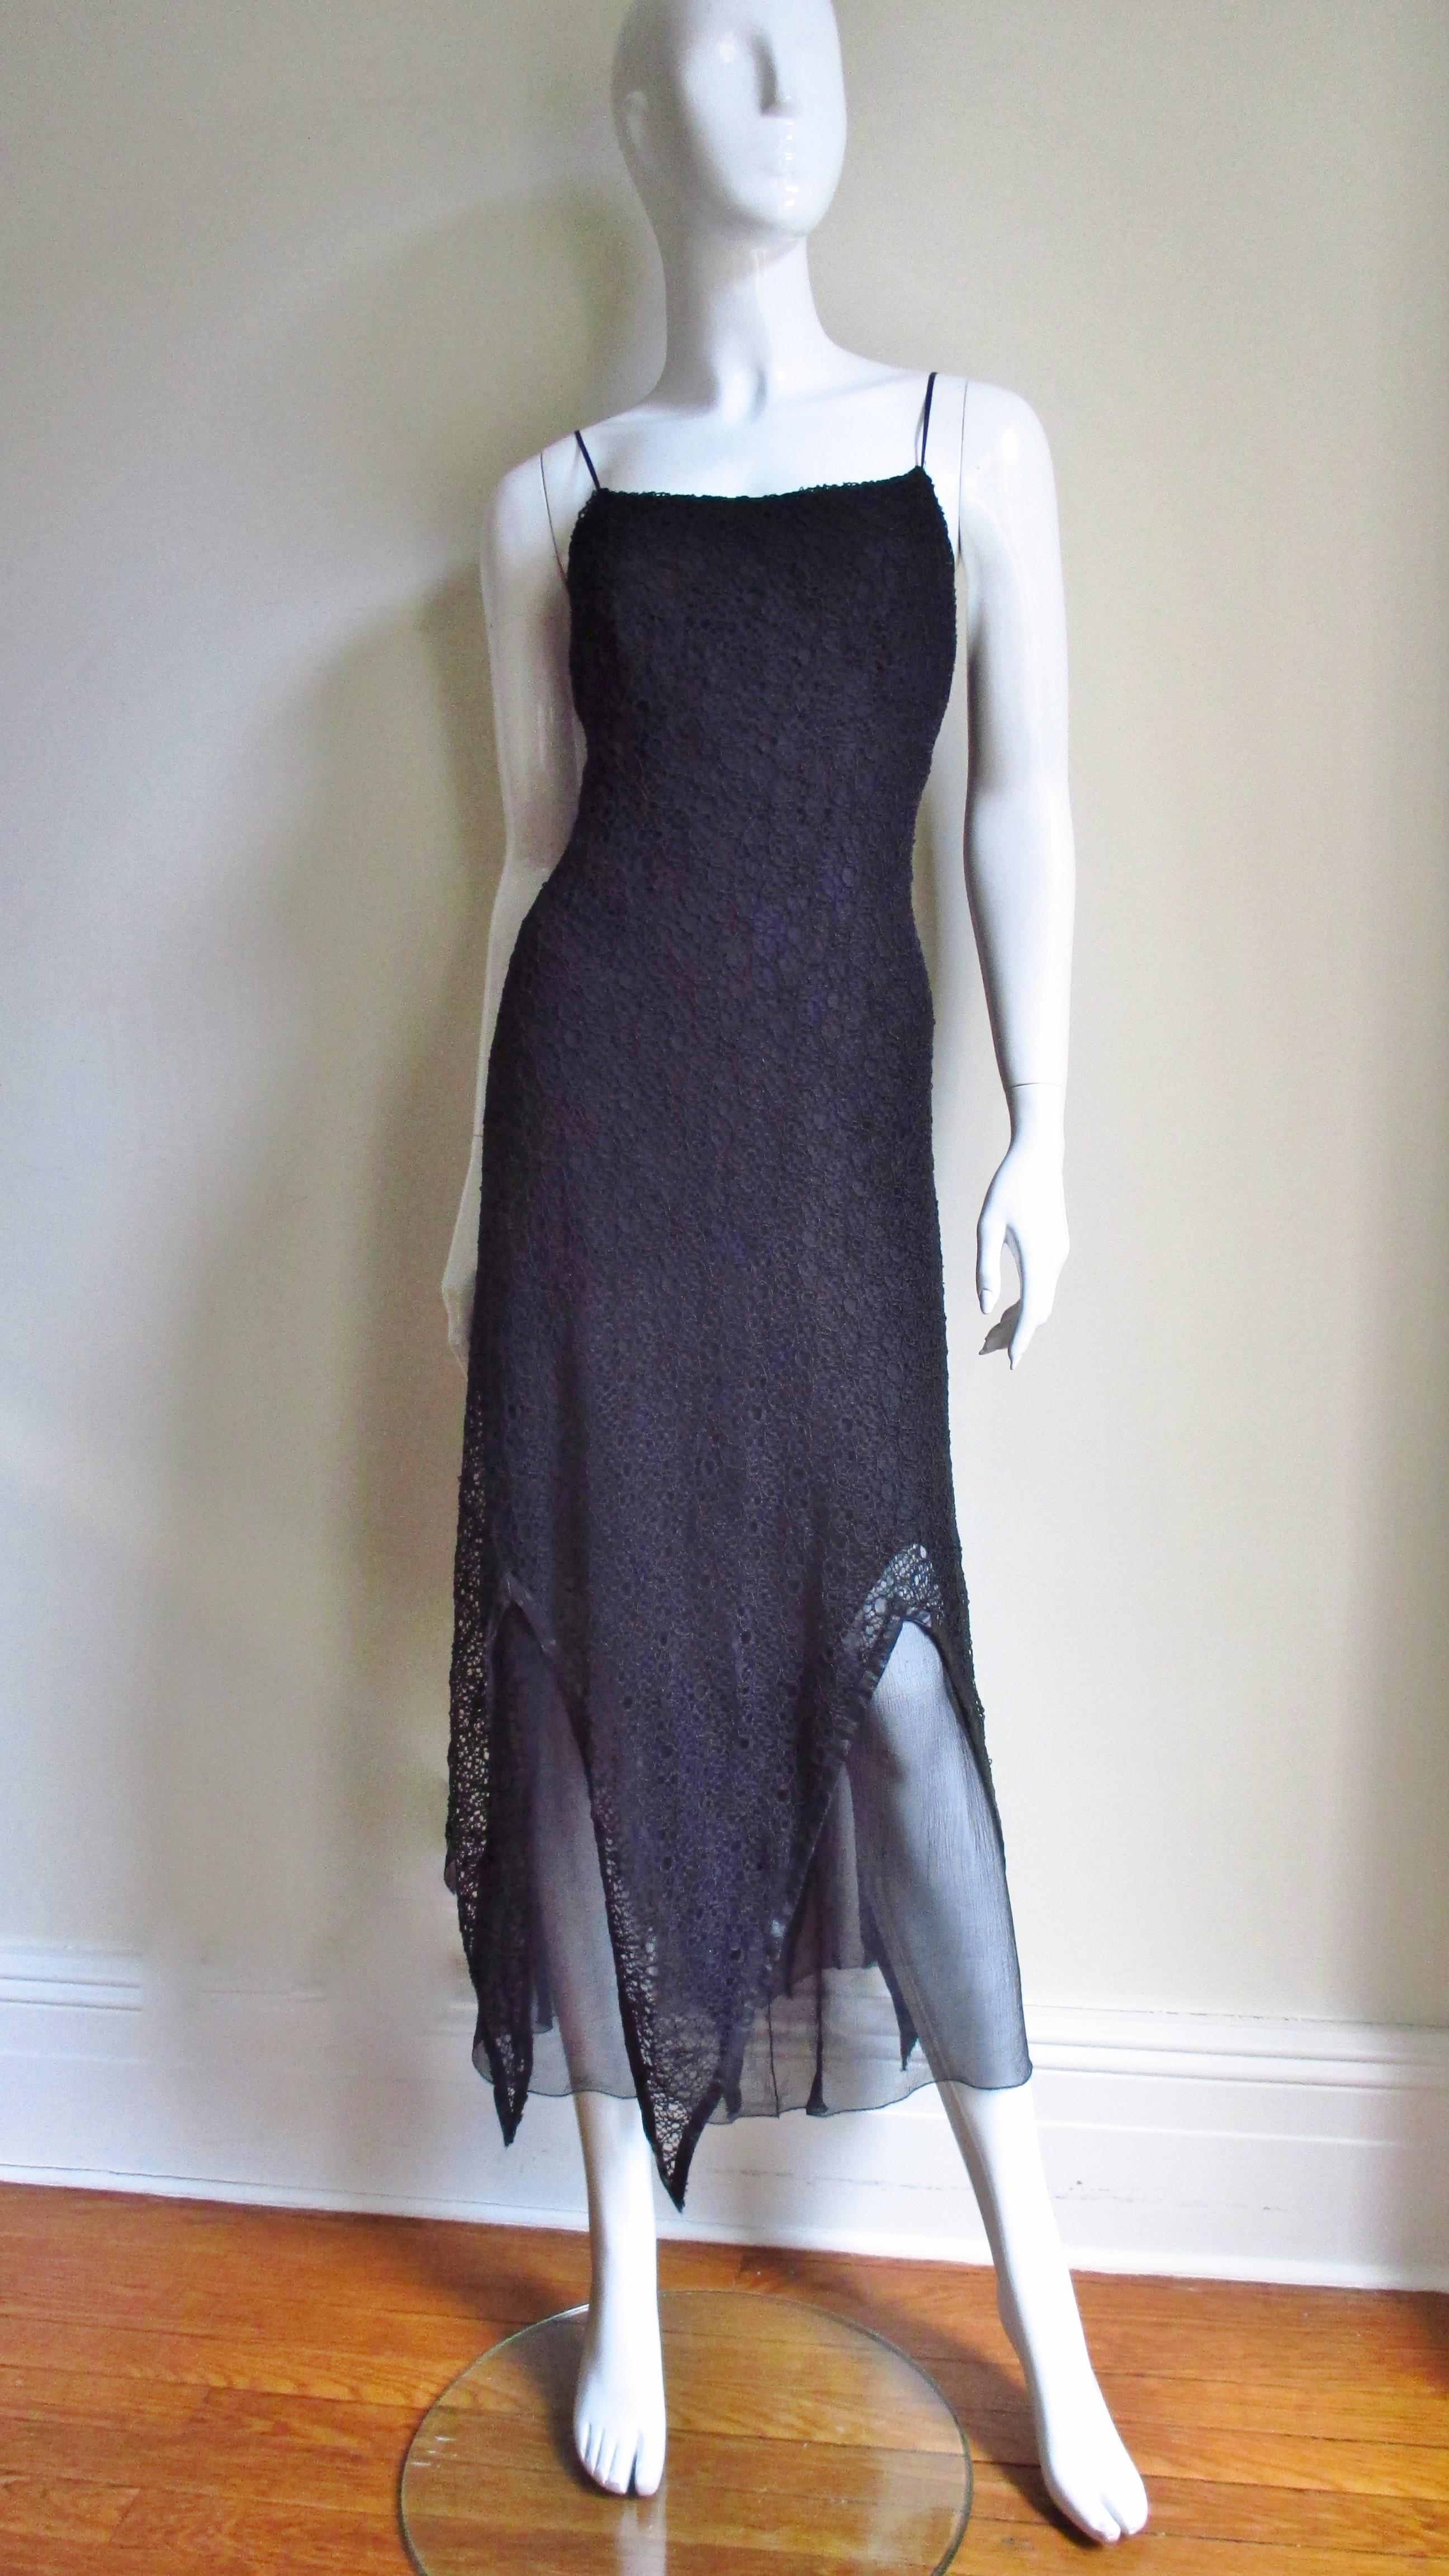 A fabulous black silk slip style dress by Karl Lagerfeld. It consists of 3 layers- the top of lace with a leather trimmed pointed hem over a layer of semi sheer silk with a straight hem over another layer of silk with a pointed hem.  Fabulous.  The